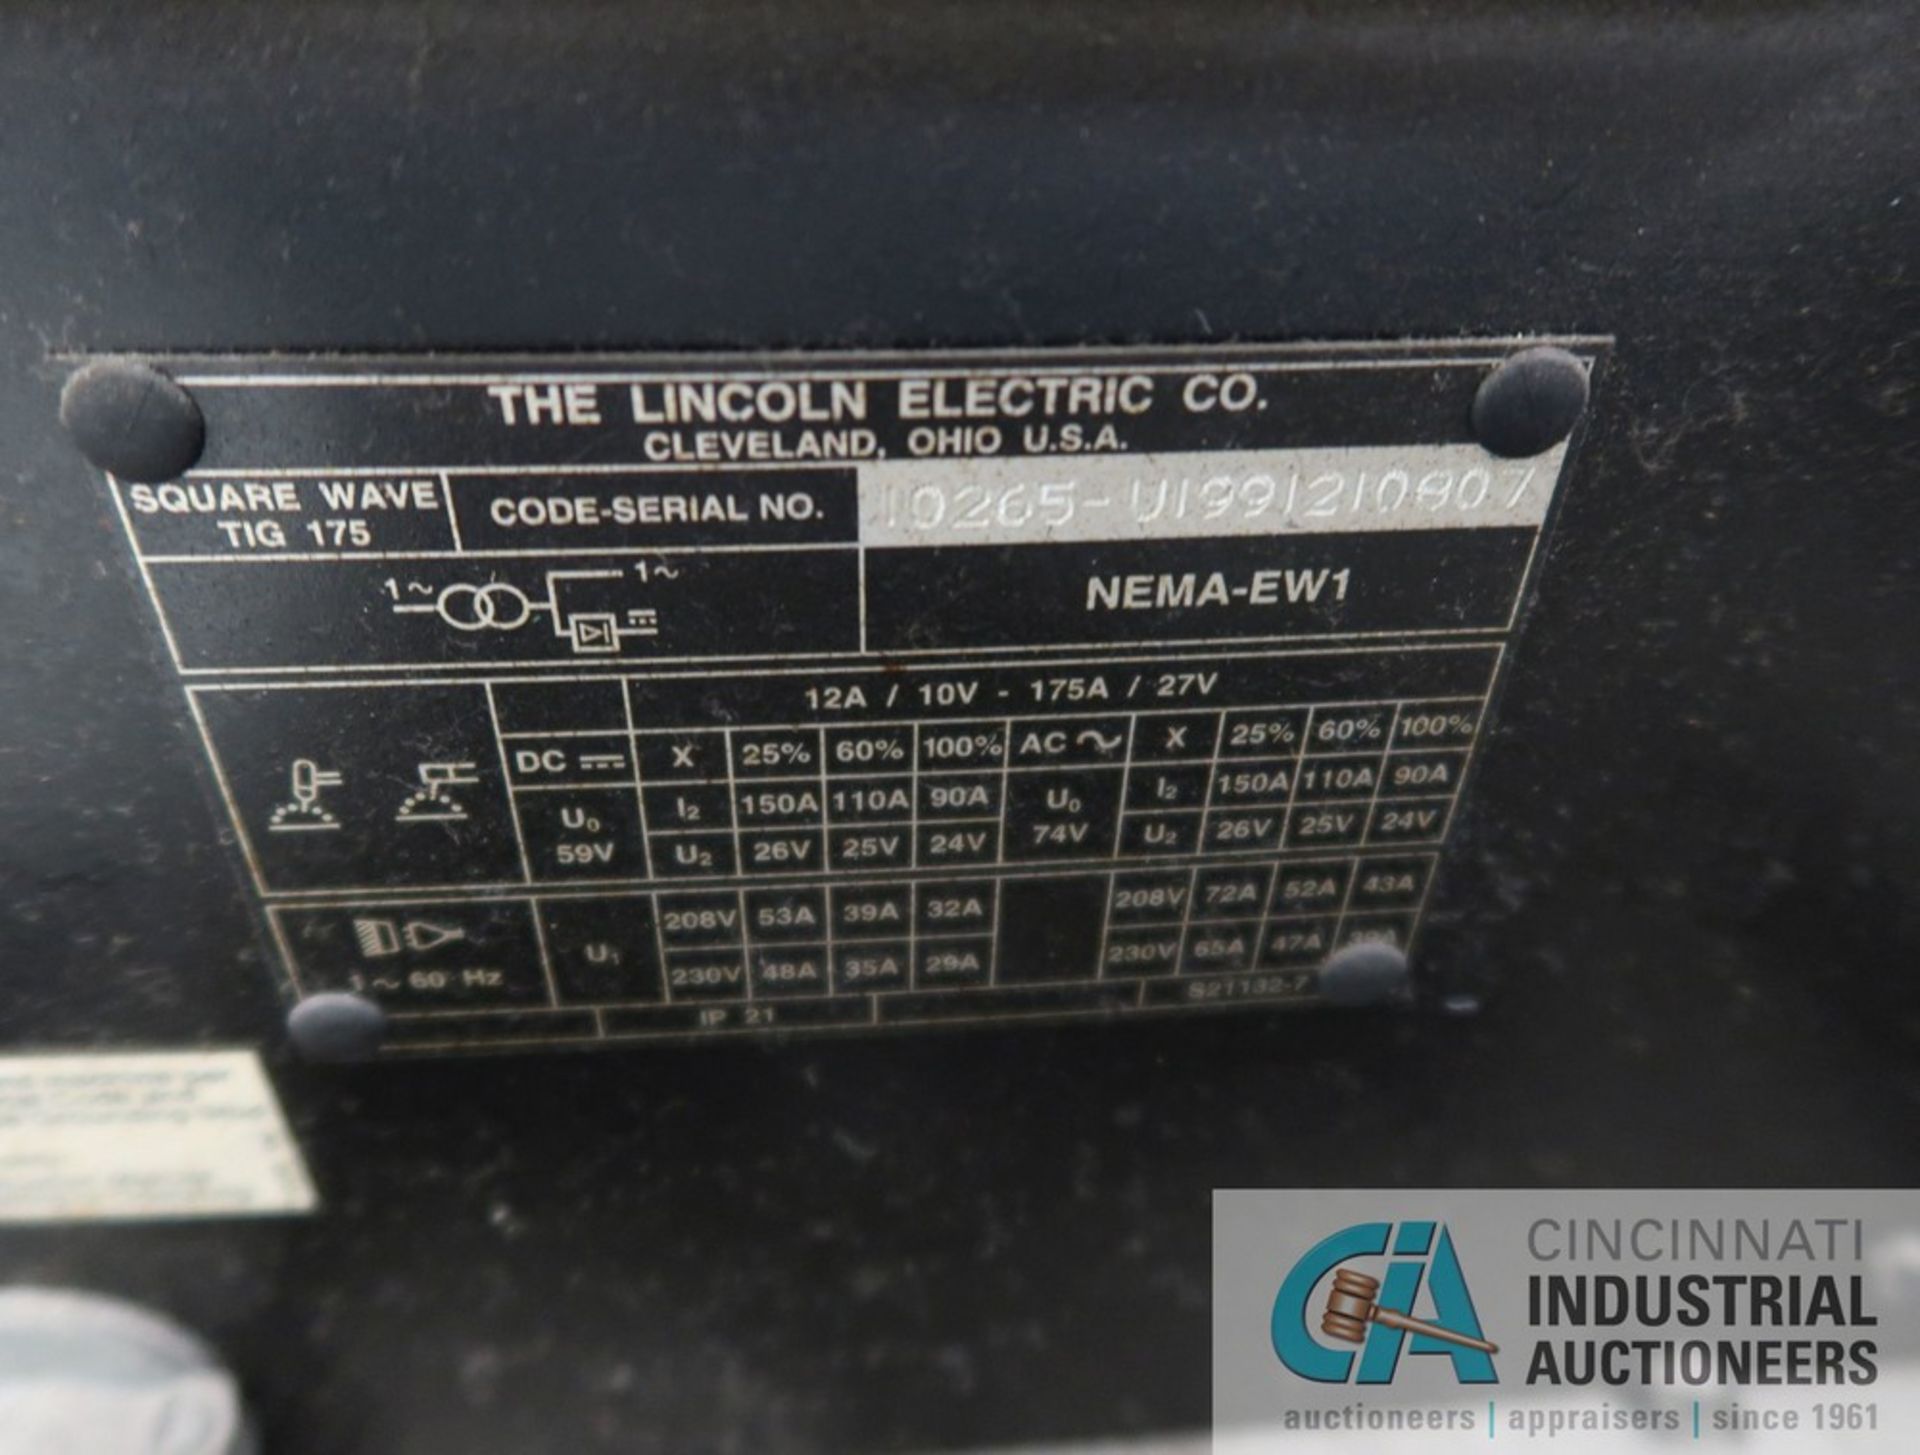 175 AMP LINCOLN ELECTRIC MODEL SQUARE WAVE TIG 175 WELDING POWER SOURCE; S/N 10265-U1991210807 - Image 5 of 5